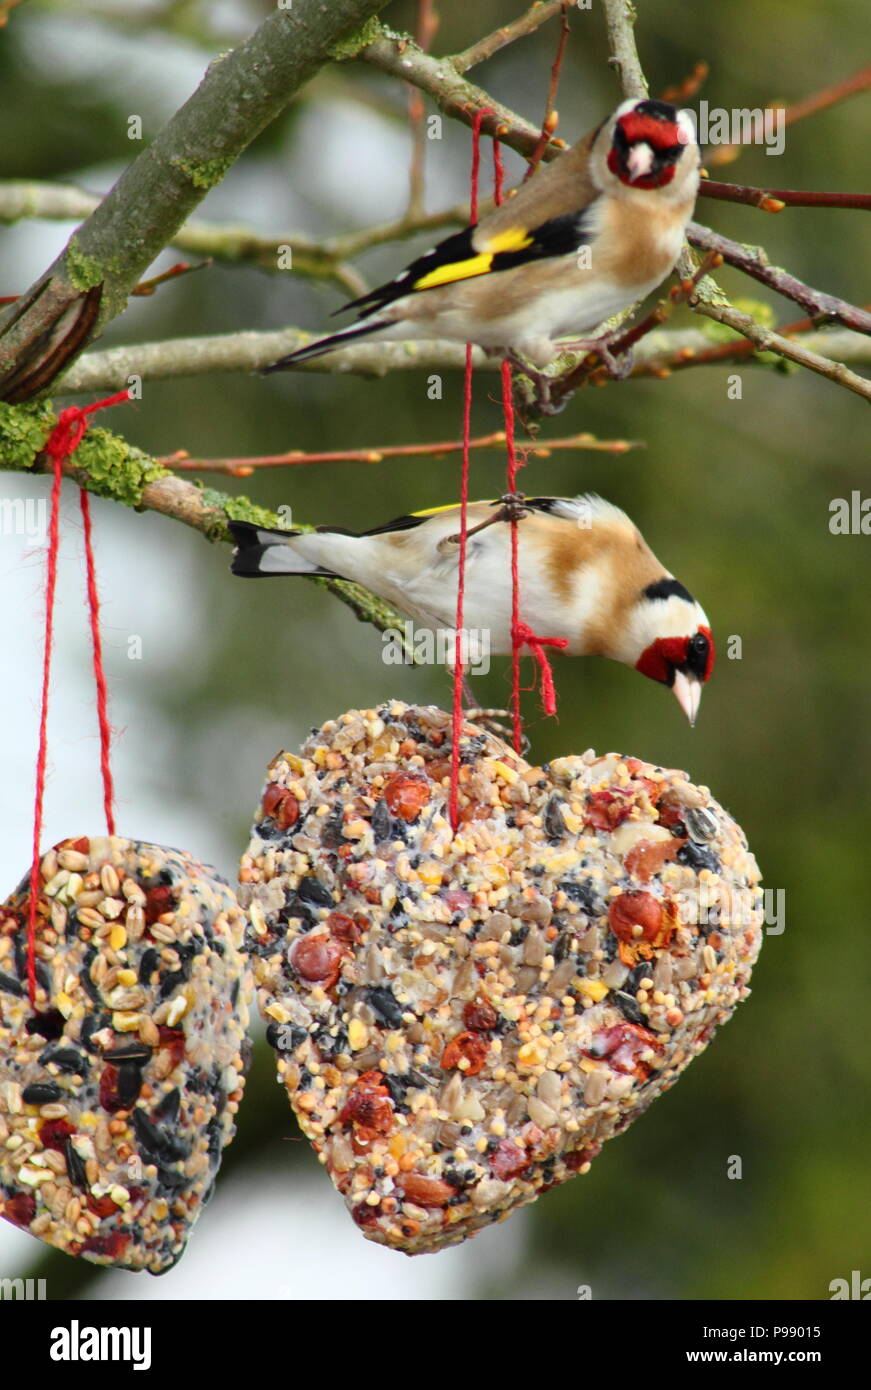 Goldfinch (Carduelis carduelis) feeding on a heart shaped seed, fat and berry bird feeder, England, UK Stock Photo